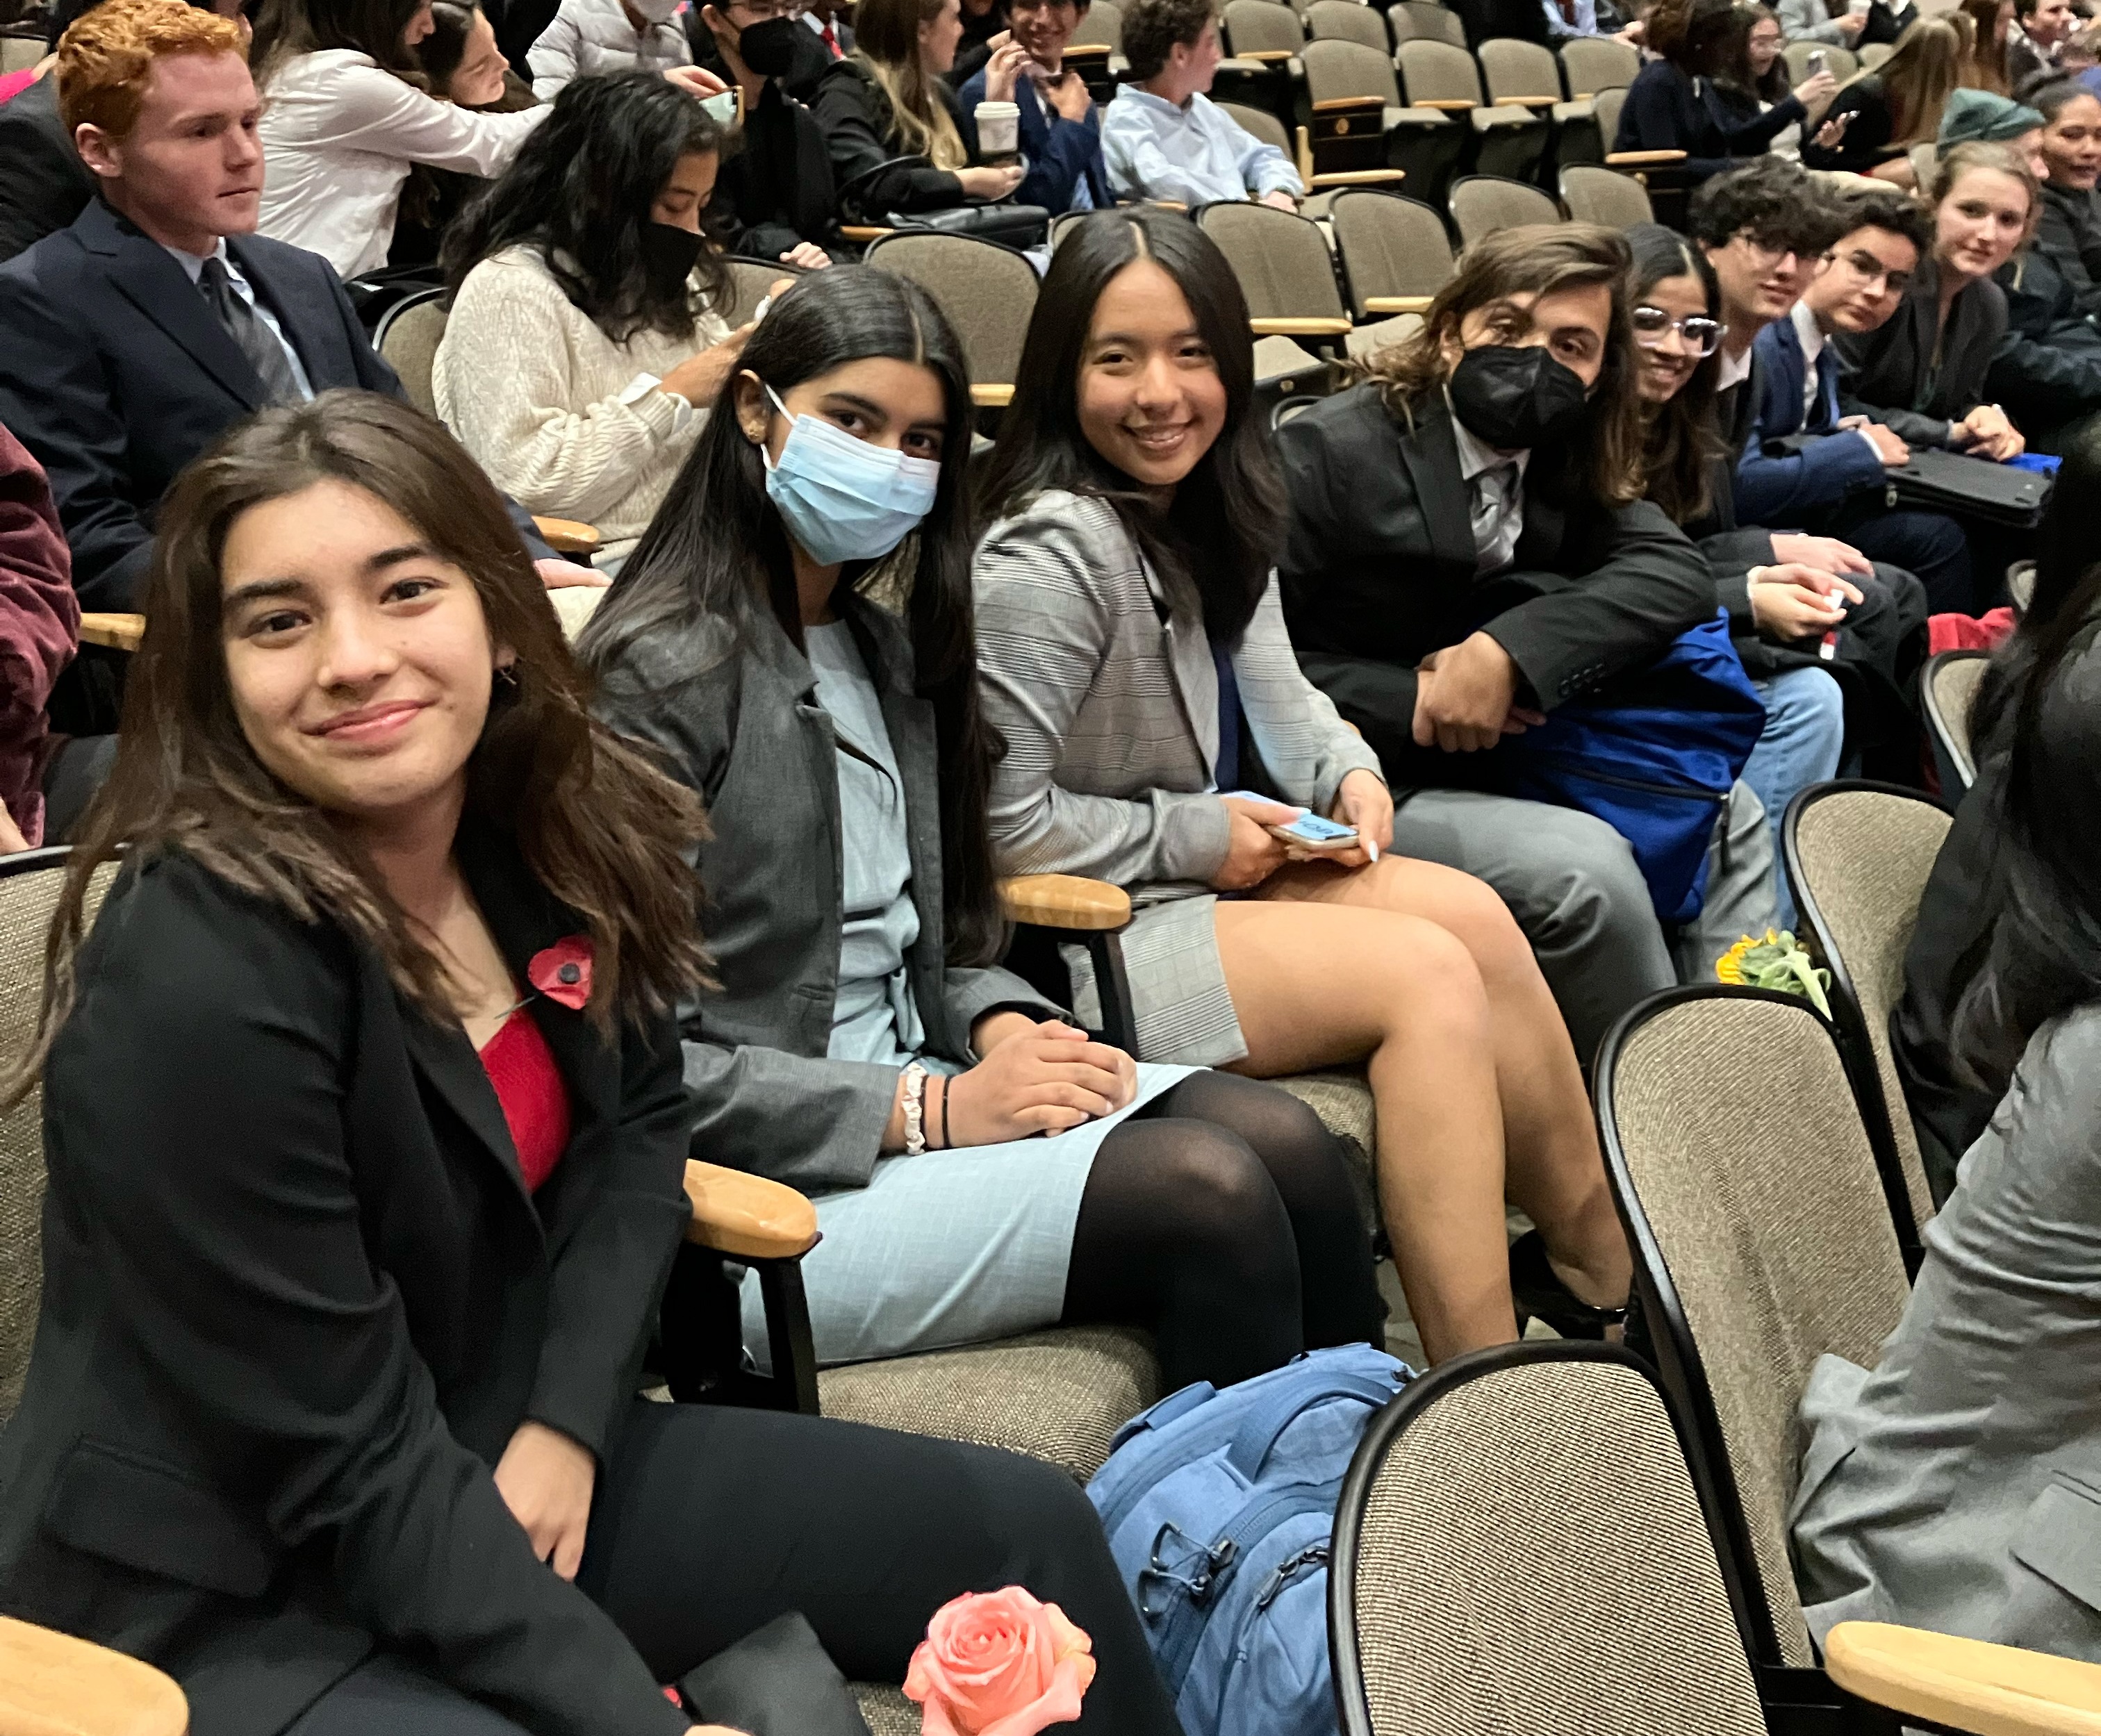 The Model UN team in the auditorium preparing for the weekend's events.